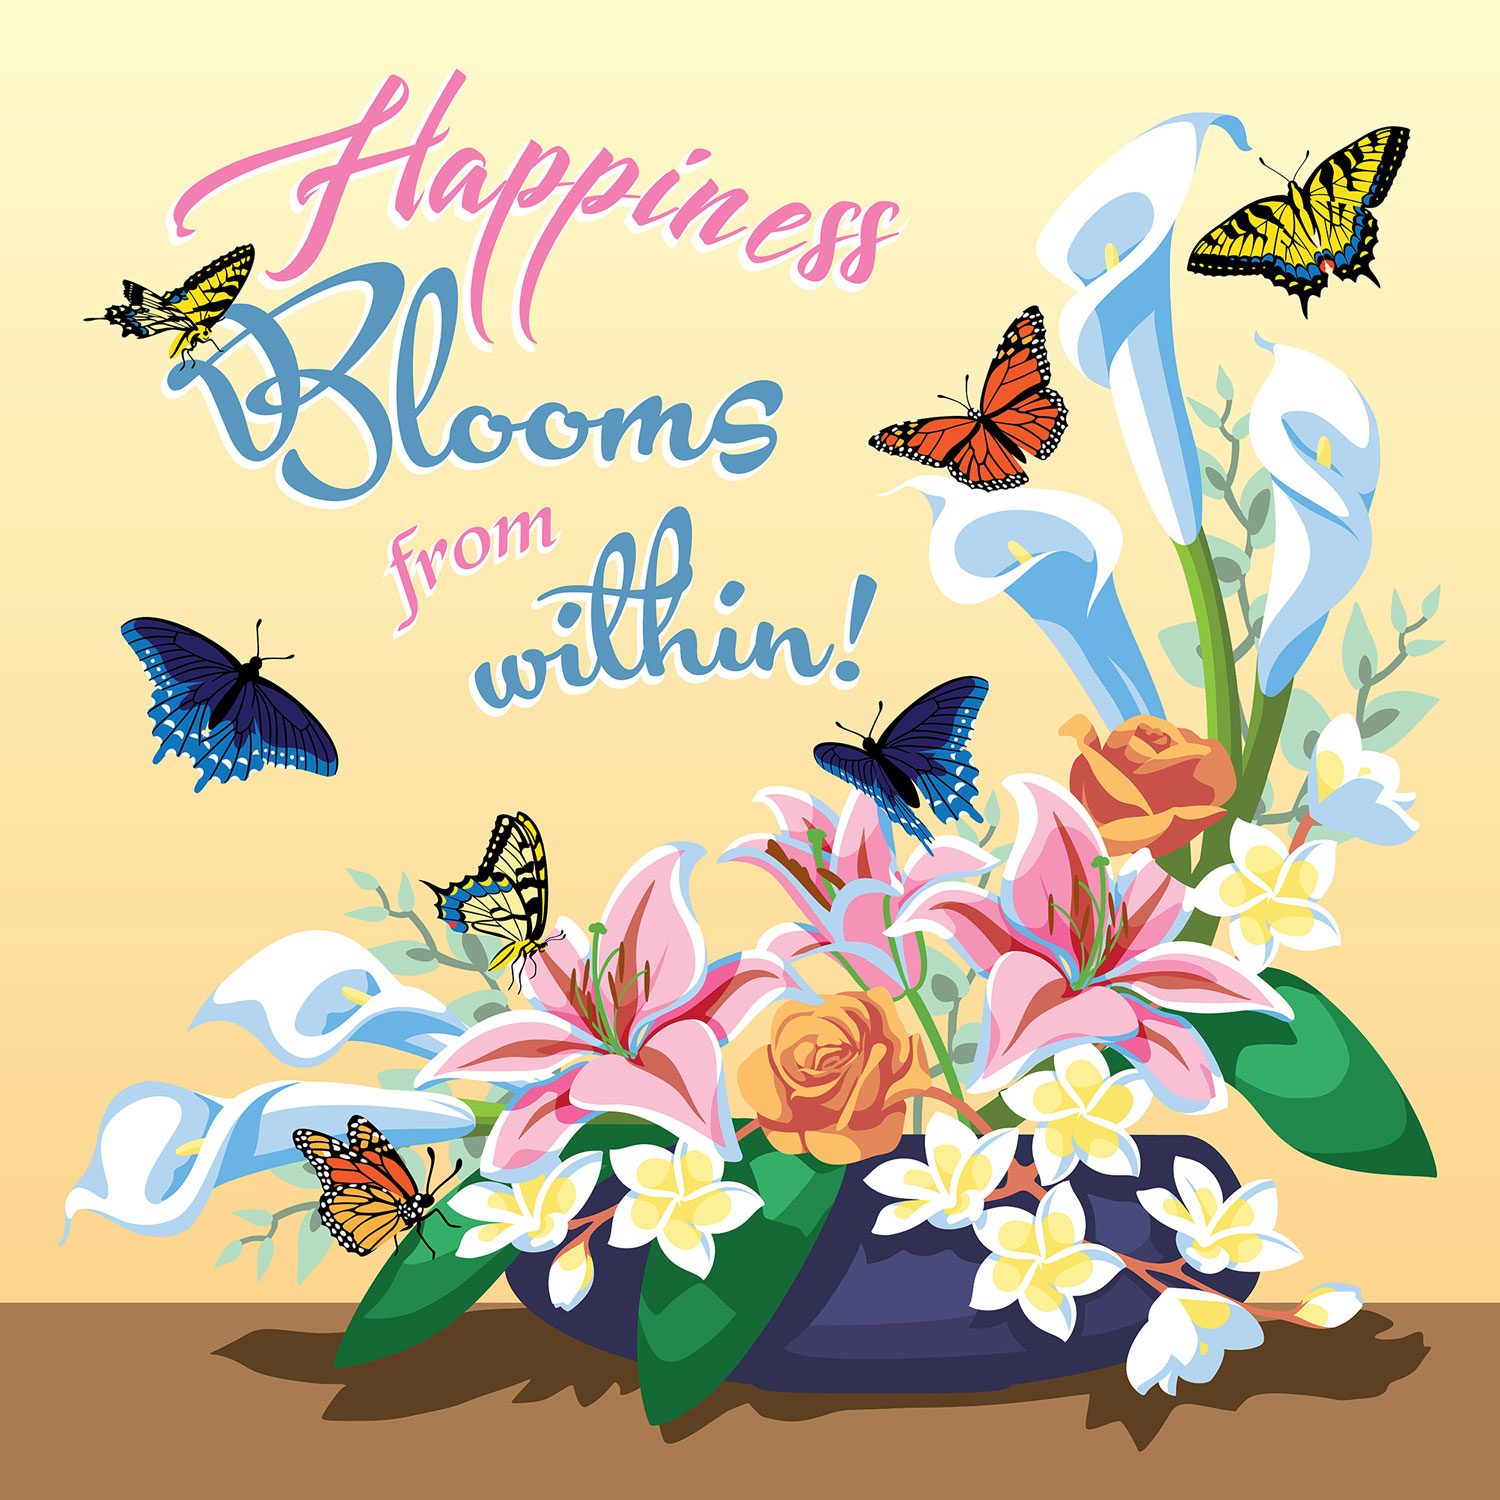 Happiness Blooms from Within